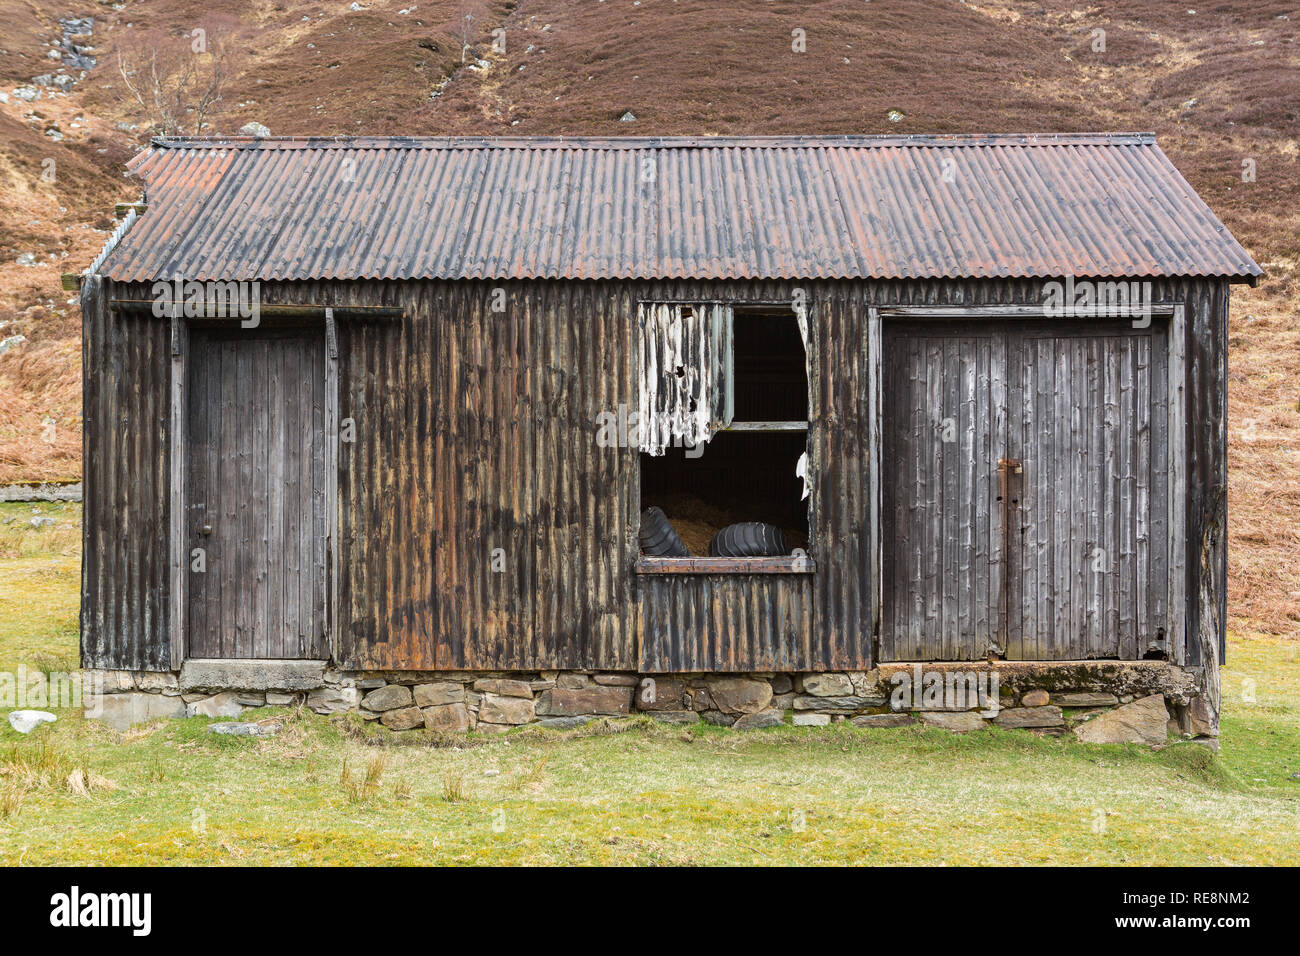 Derelict shed being used for agricultural purposes in Glen Cannich, Highland Region, Scotland Stock Photo